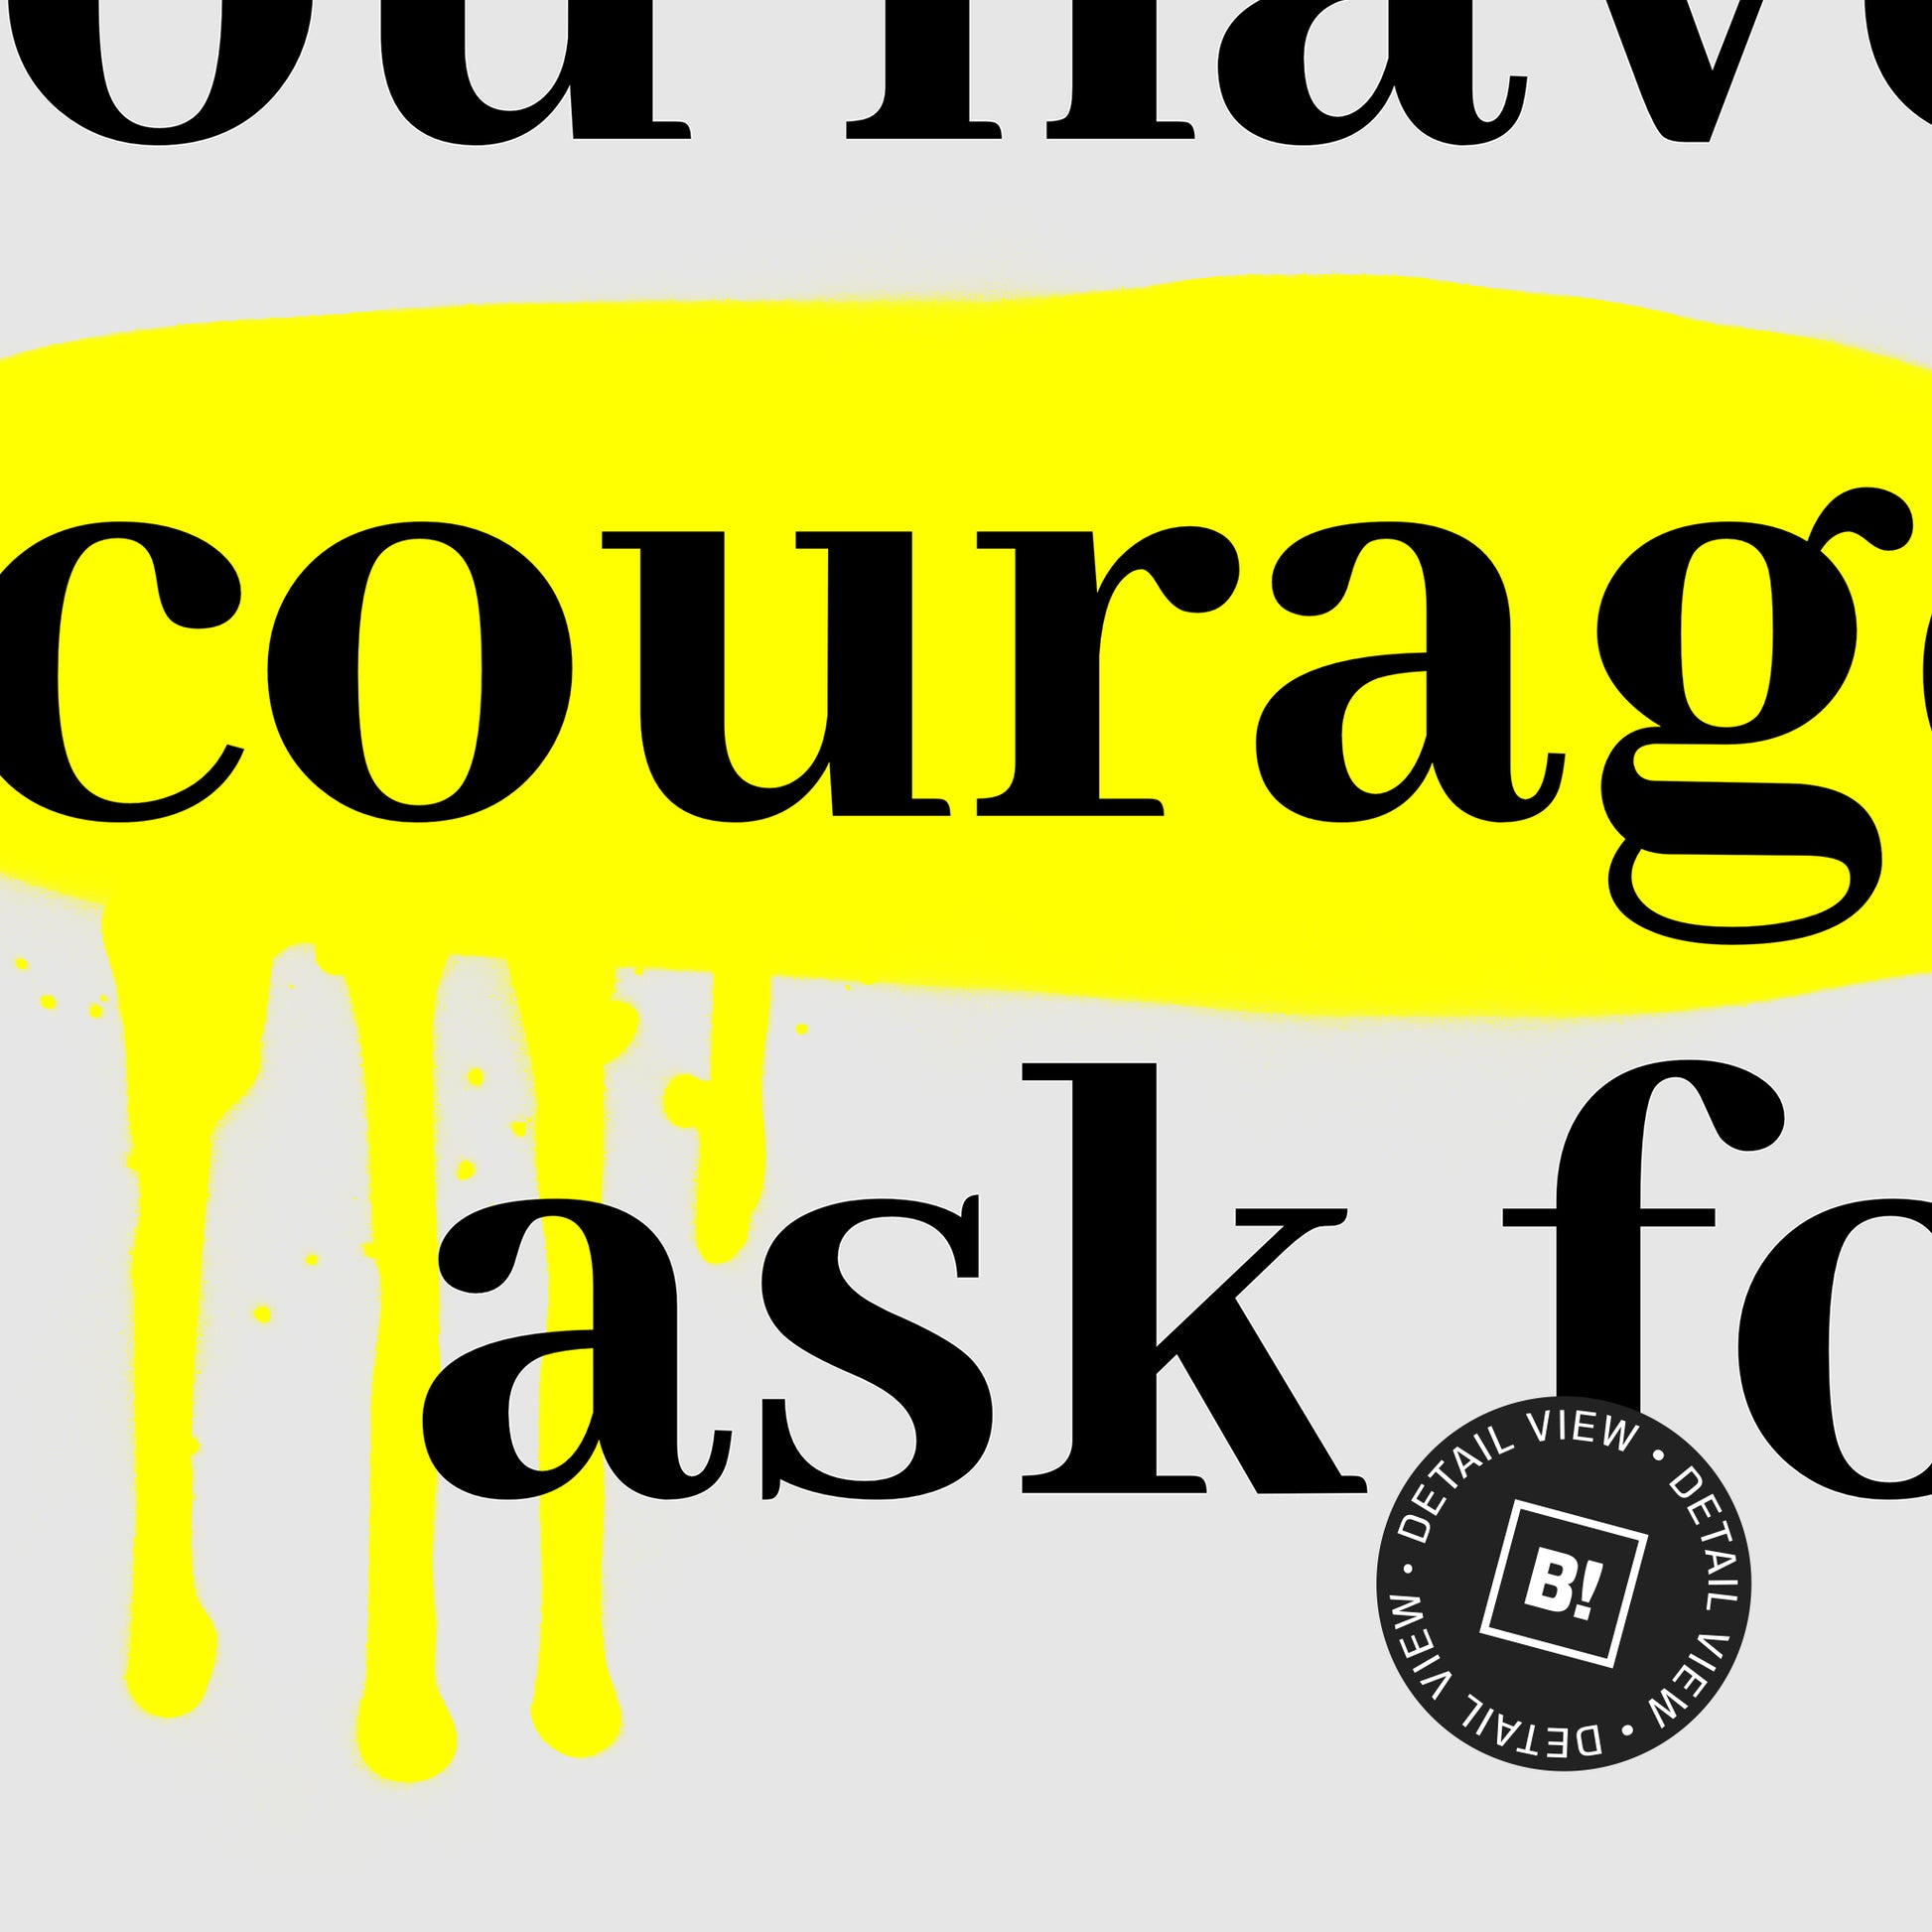 A detail view of Oprah Winfrey's famous "You get in life what you have the courage to ask for" quote art print. This artwork was printed using the giclée process on archival acid-free paper and shows its timeless beauty in every detail.